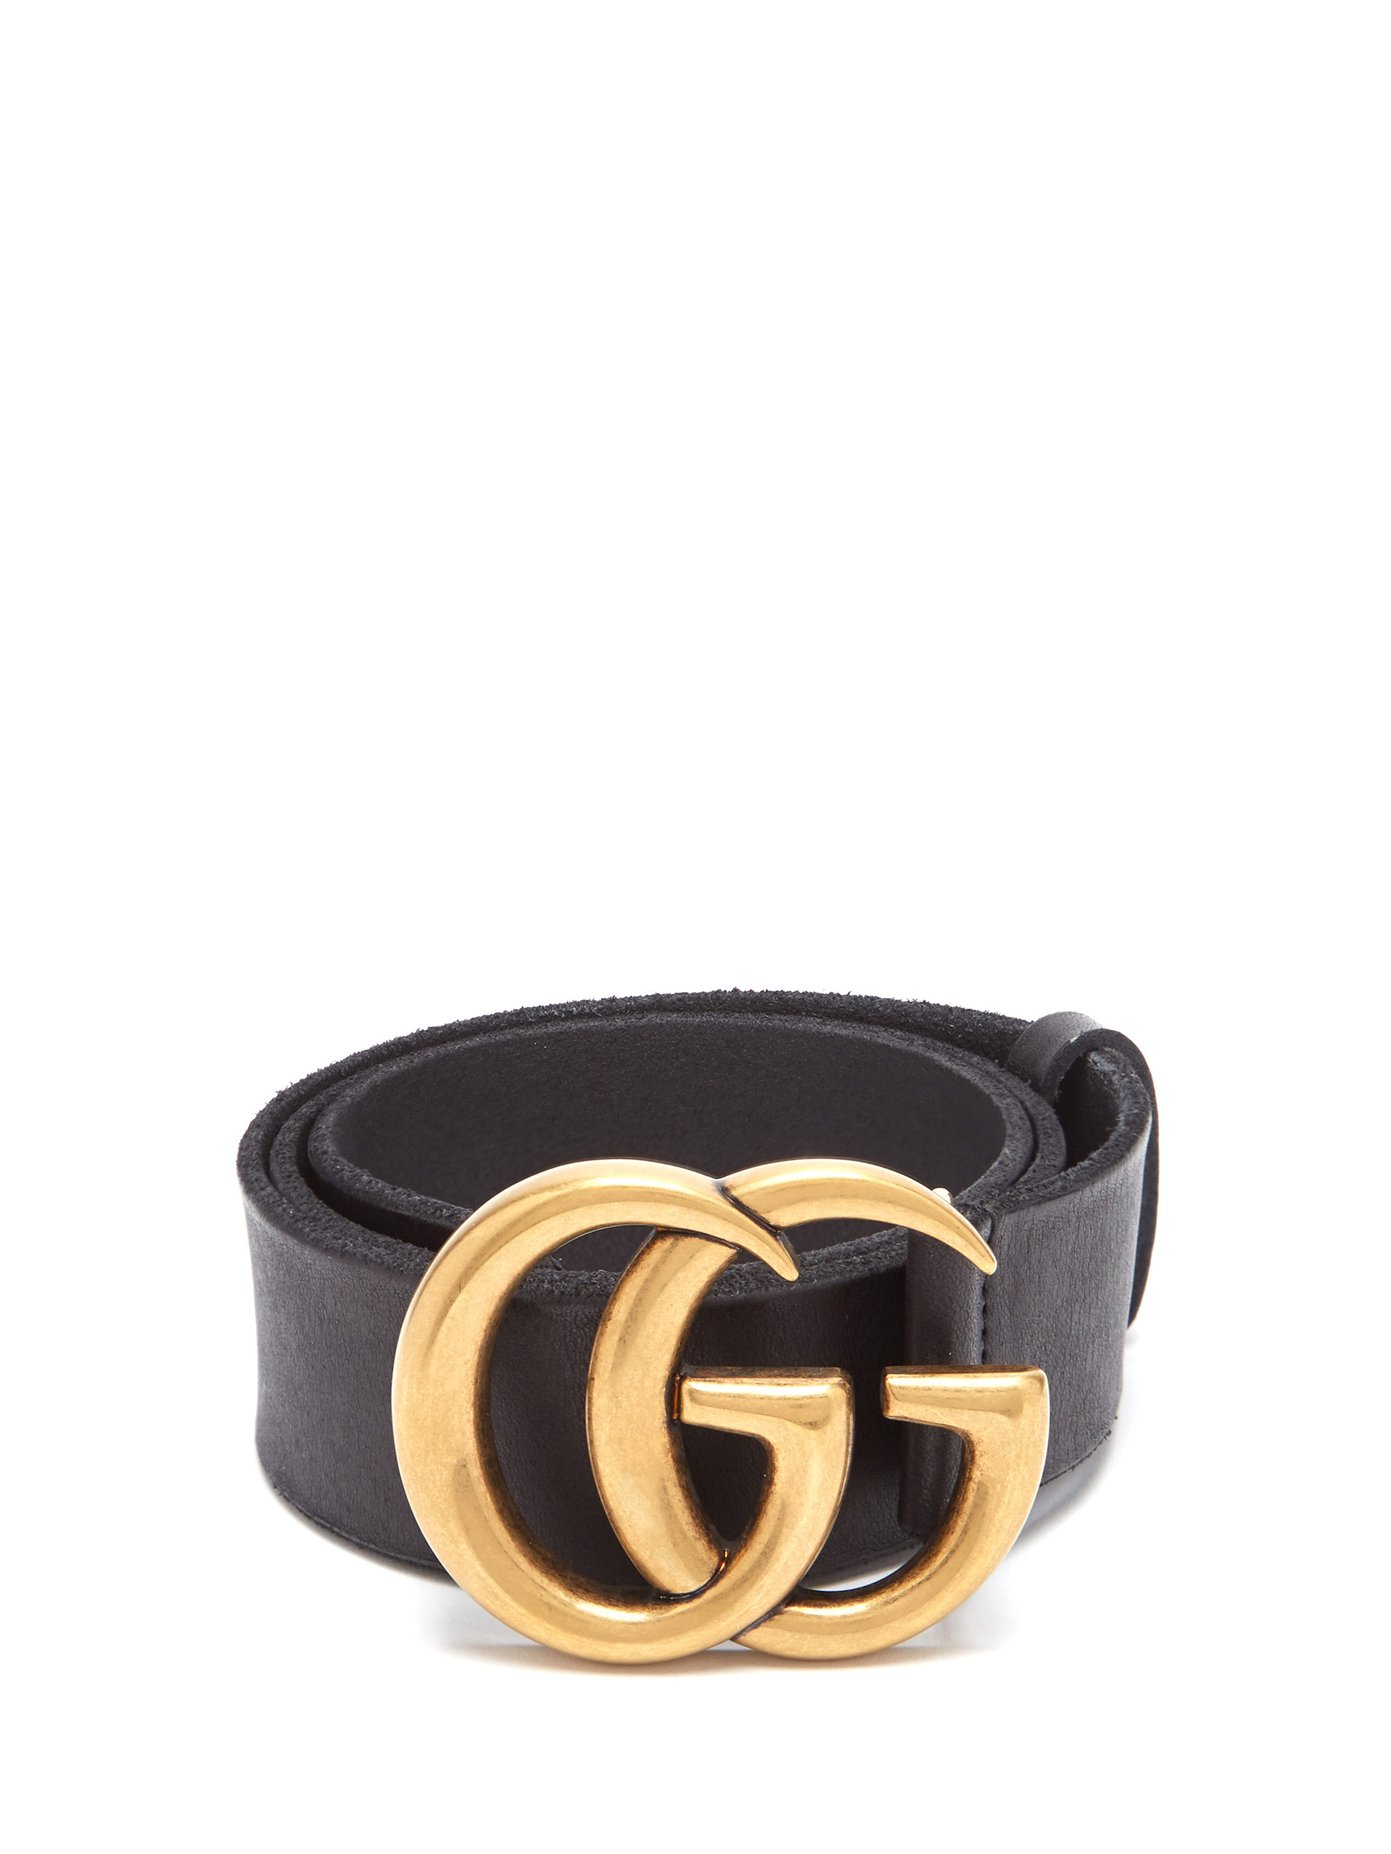 leather belt with gucci logo buckle